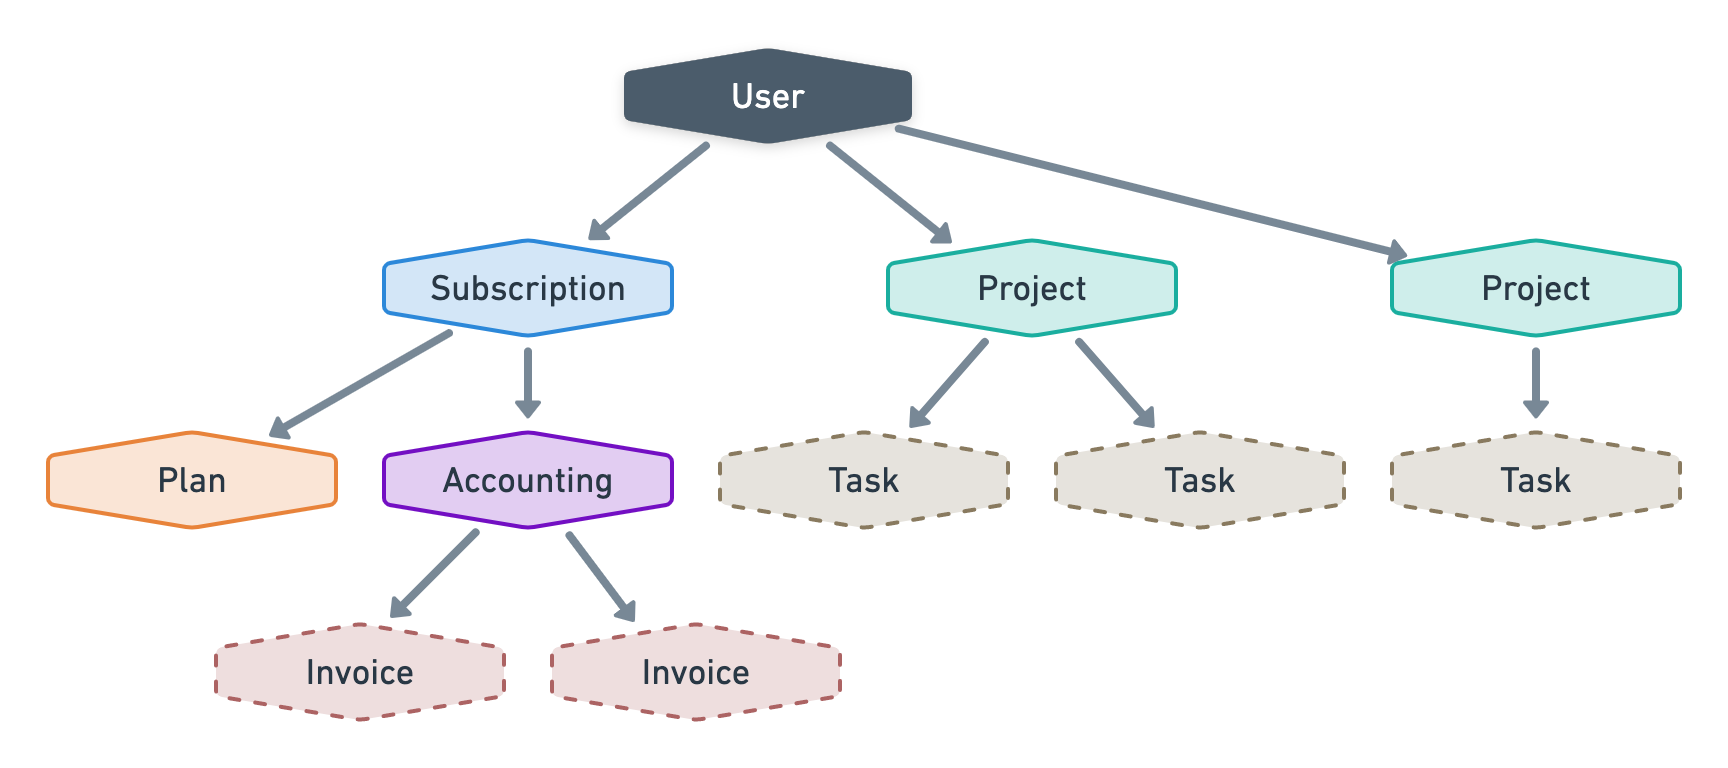 A tree of nodes that starts with a User root node which has three children: Subscription, Project and Project (again). The Subscription node has two children: Plan and Accounting. The Accounting node has two children: Invoice and Invoice again. The first Project (attached to the root User) has two Tasks nodes as children whereas the second Project has only one.